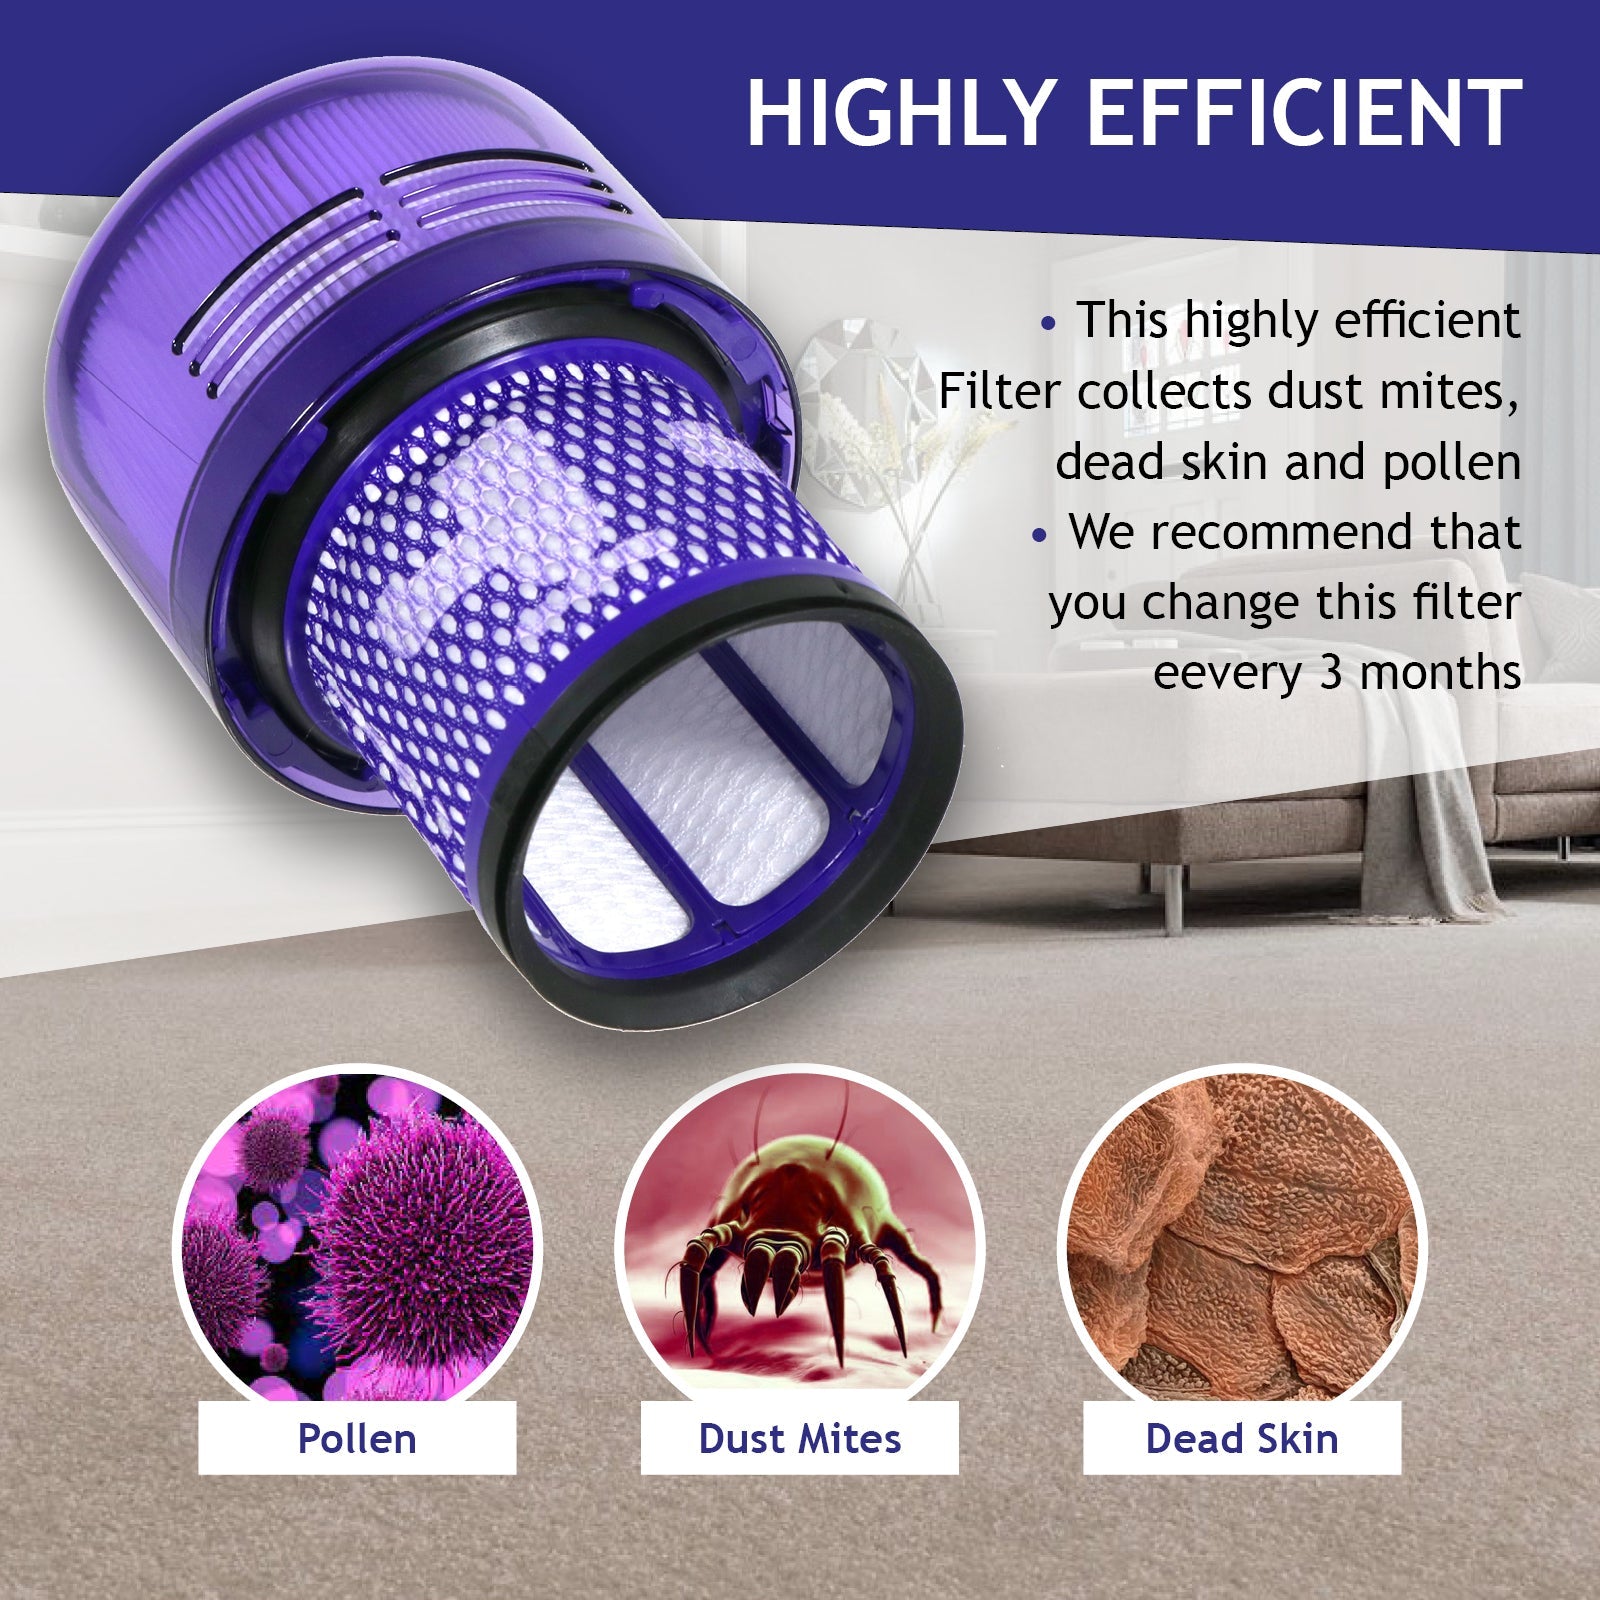 For Dyson V15 SV15 V11 SV14 Parts 970013-02 Hepa Filter Replacement  Accessories Cyclone Absolute Animal Cordless Vacuum Cleaner